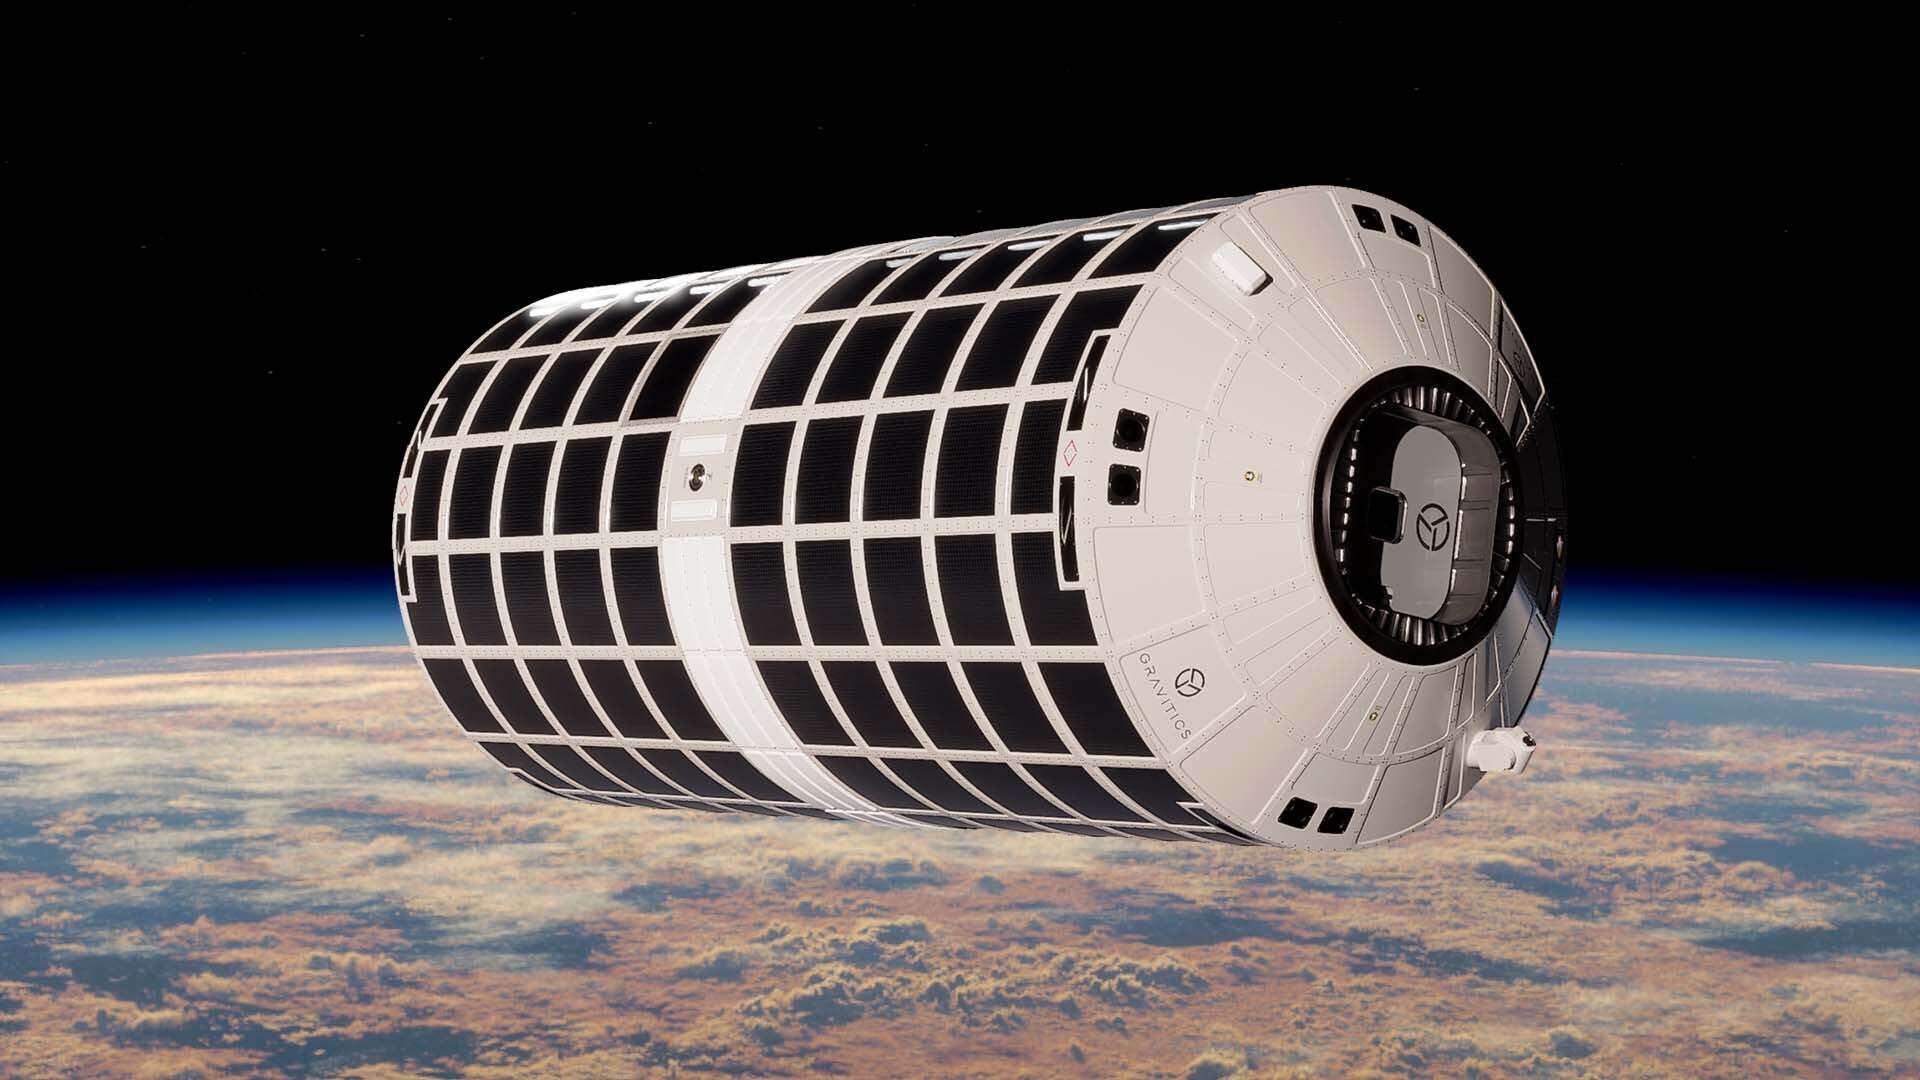 Is the US preparing a military space station?